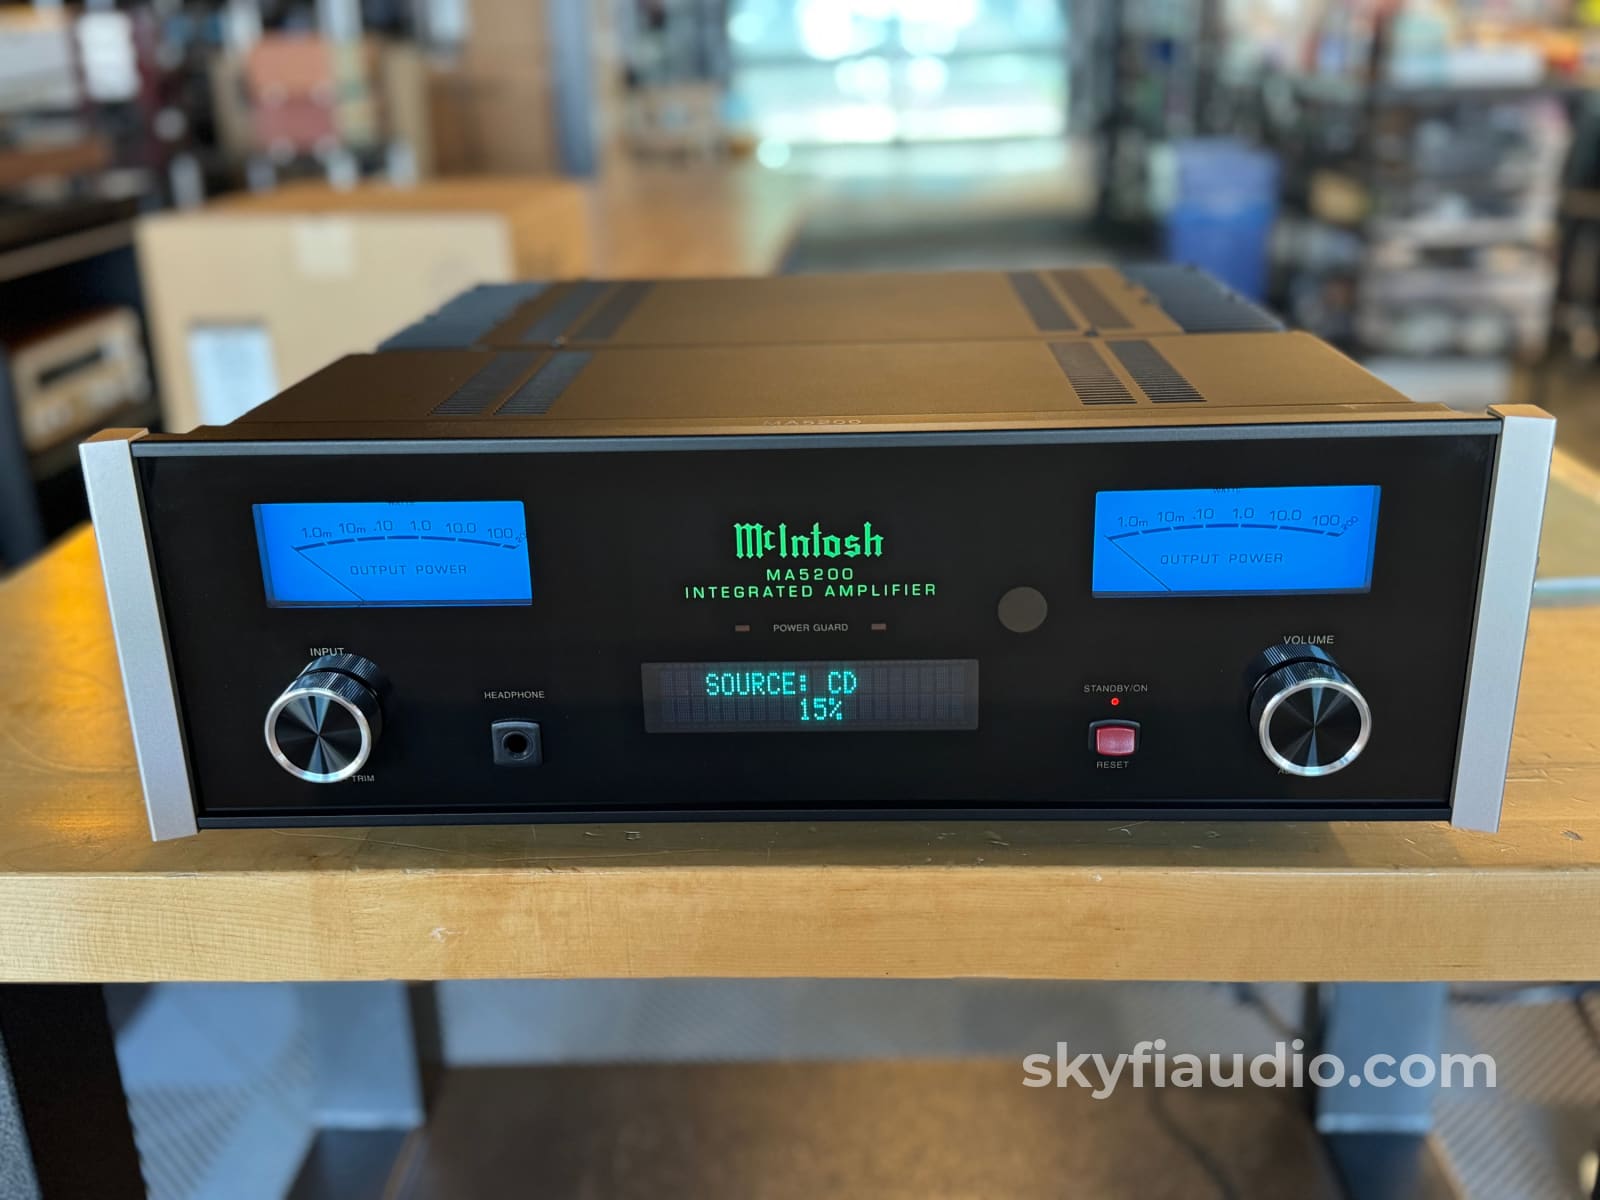 Mcintosh Ma5200 Integrated Amplifier - Like New And Complete